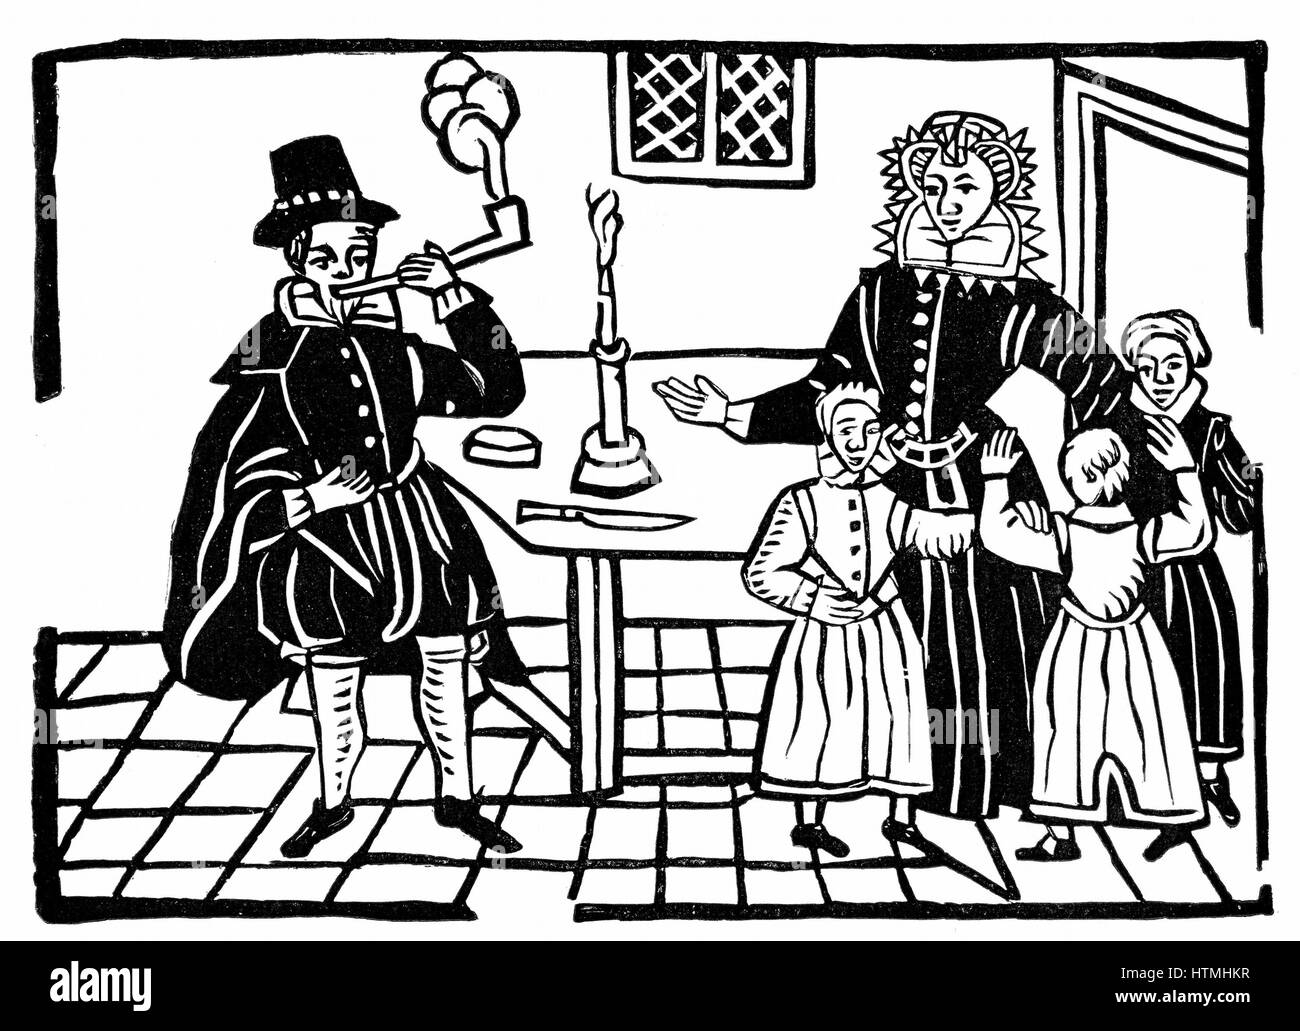 Family group: father with pipe producing much smoke while wife and children seem to be raising objections. Woodcut from the Roxburghe Ballads (early 17th century) Stock Photo